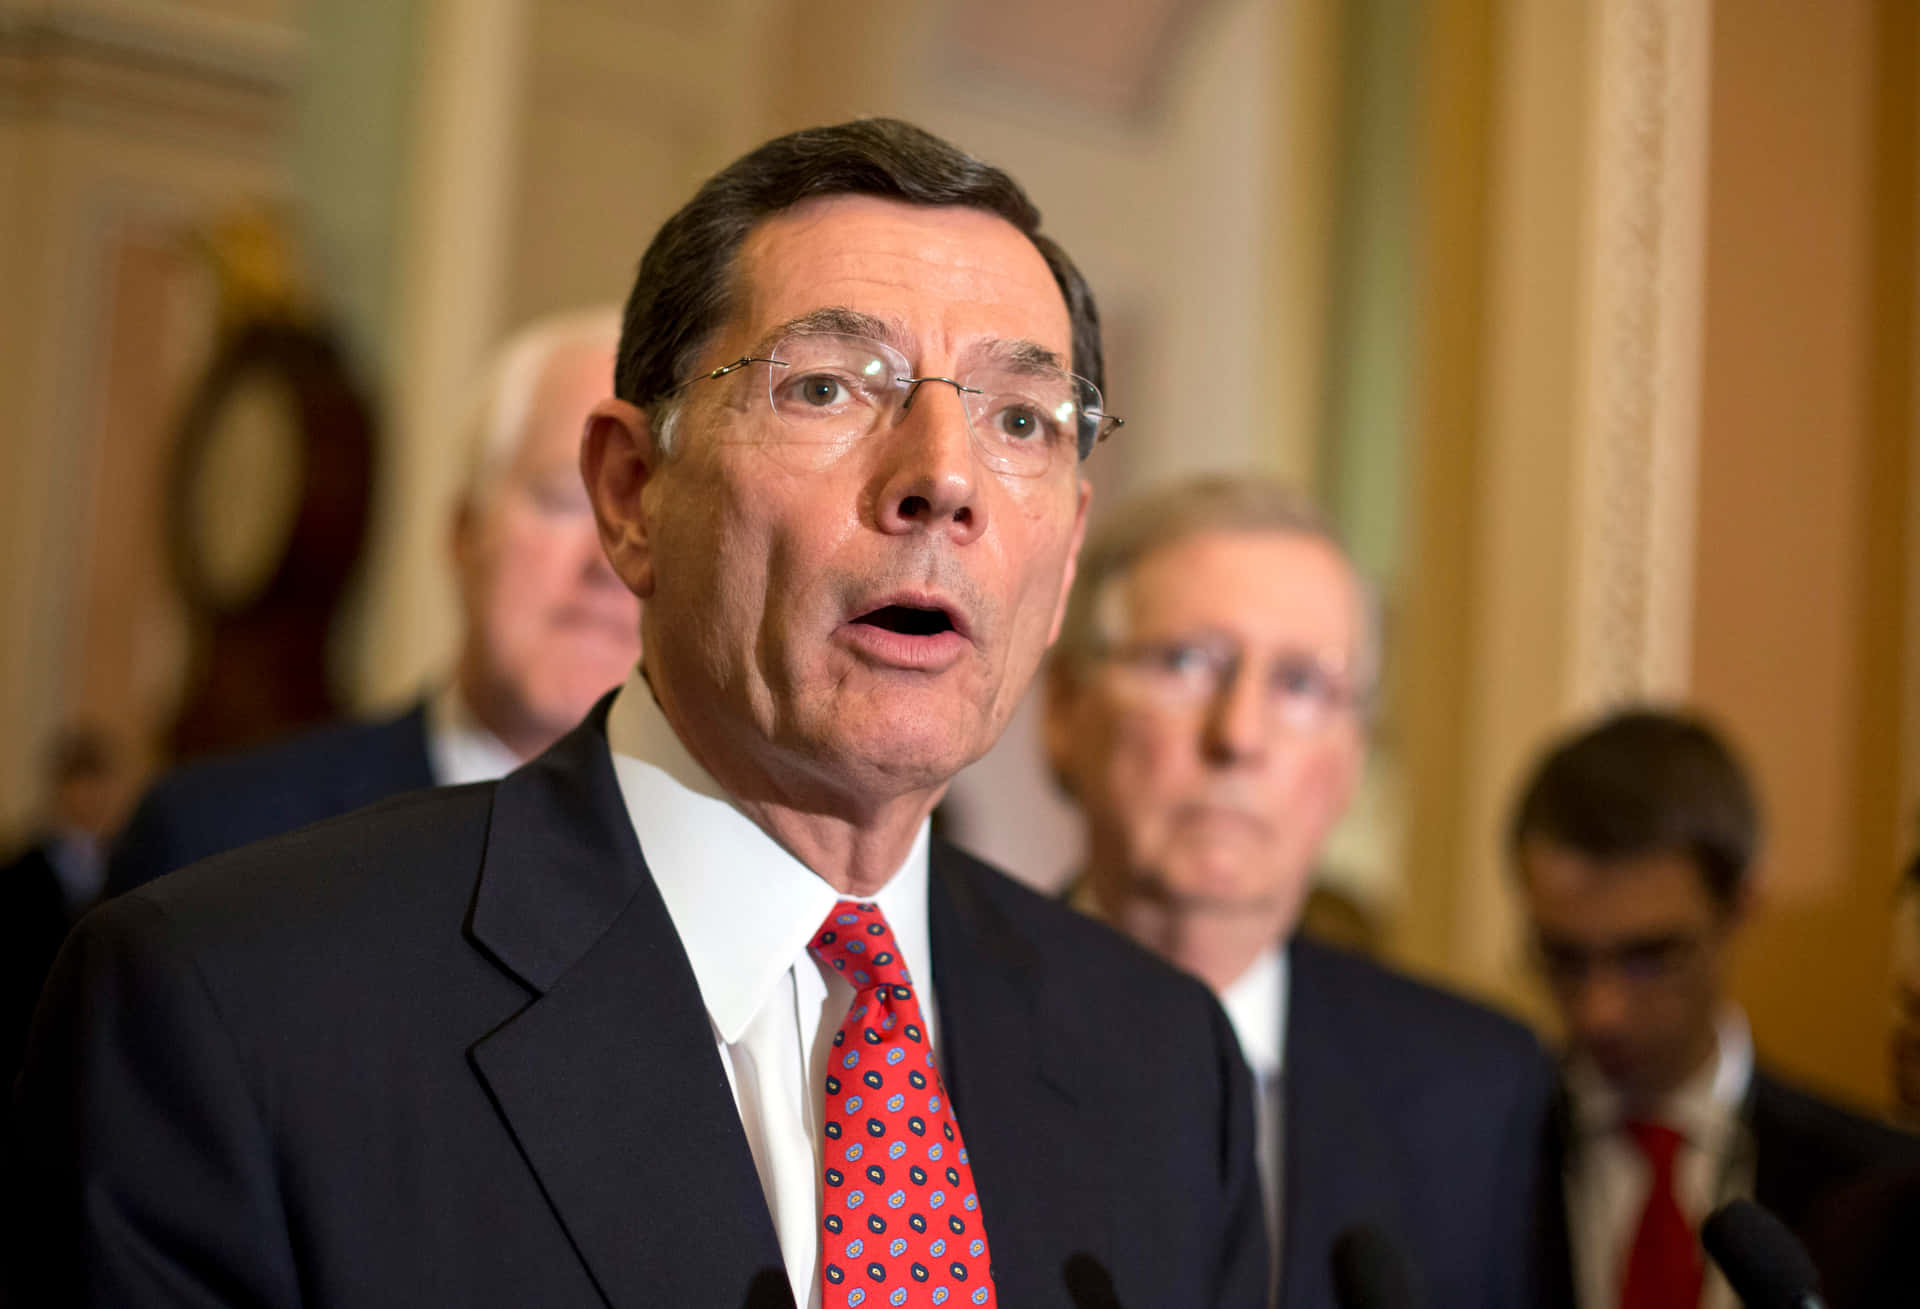 John Barrasso With People In Background Wallpaper